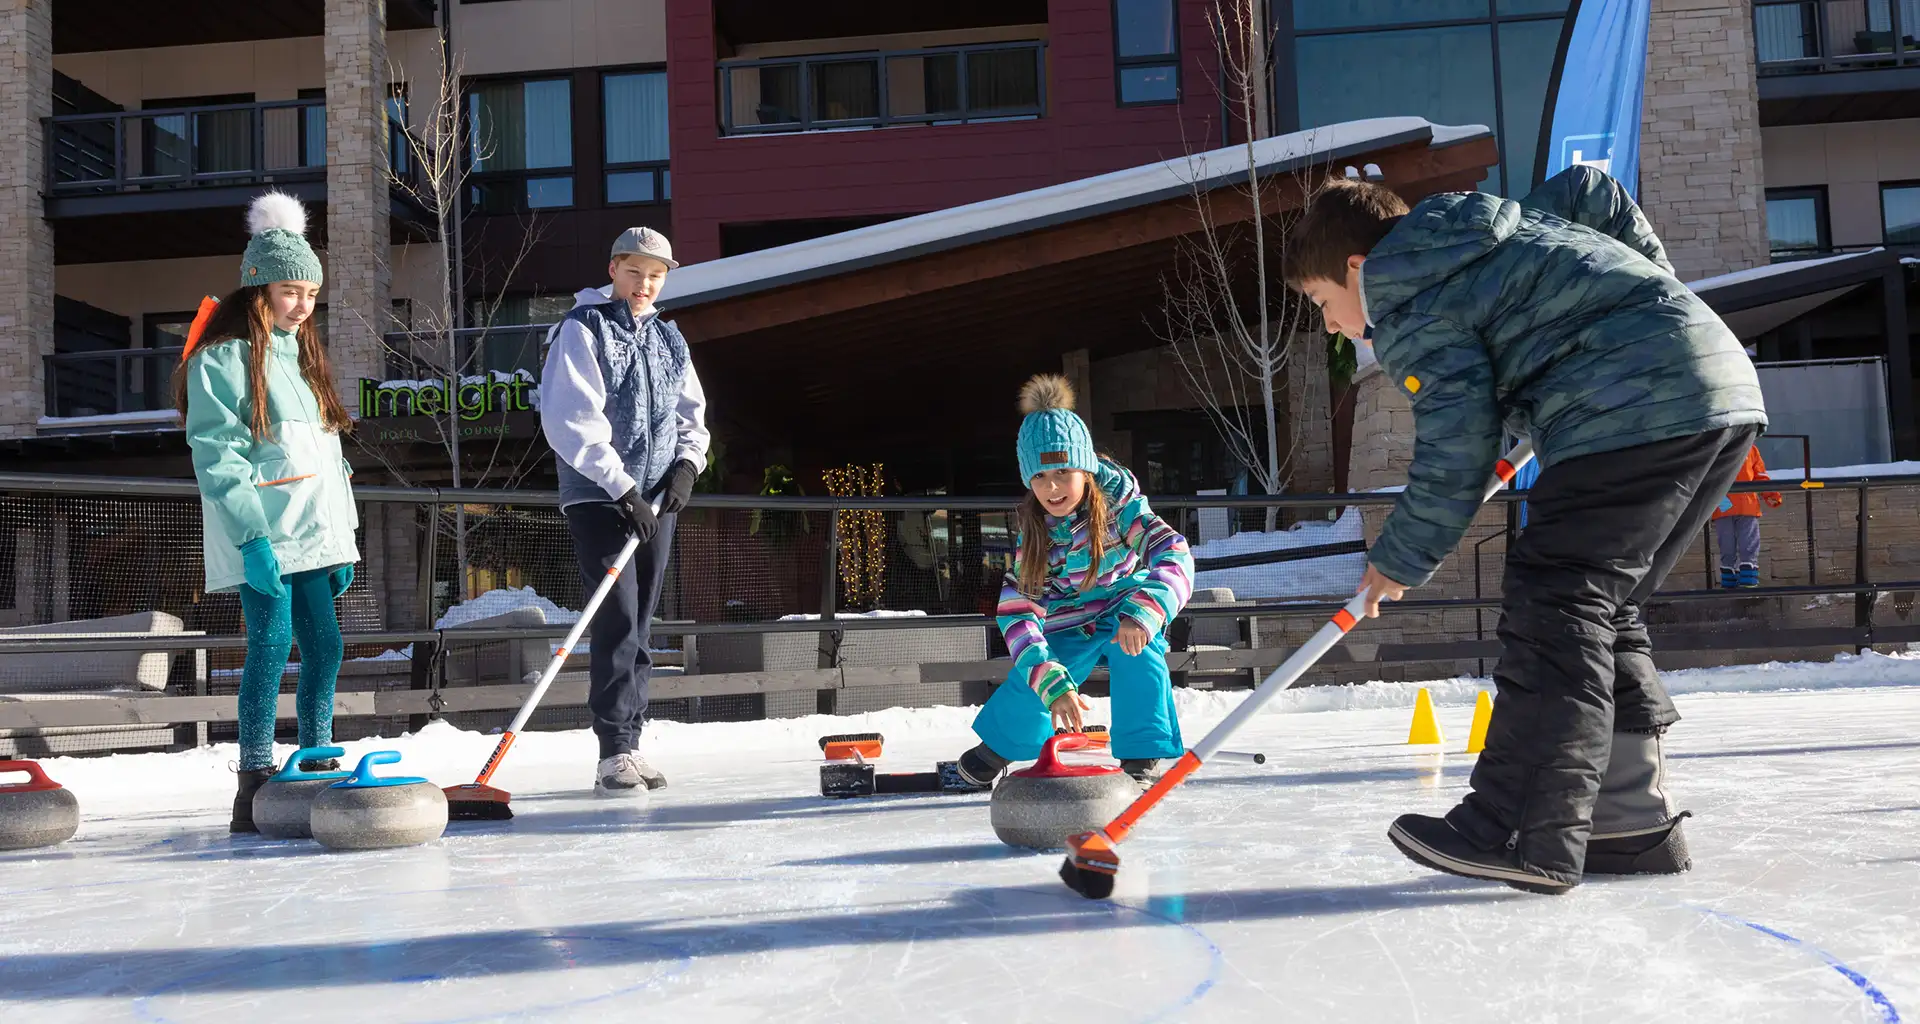 Family curling at Snowmass Base Village